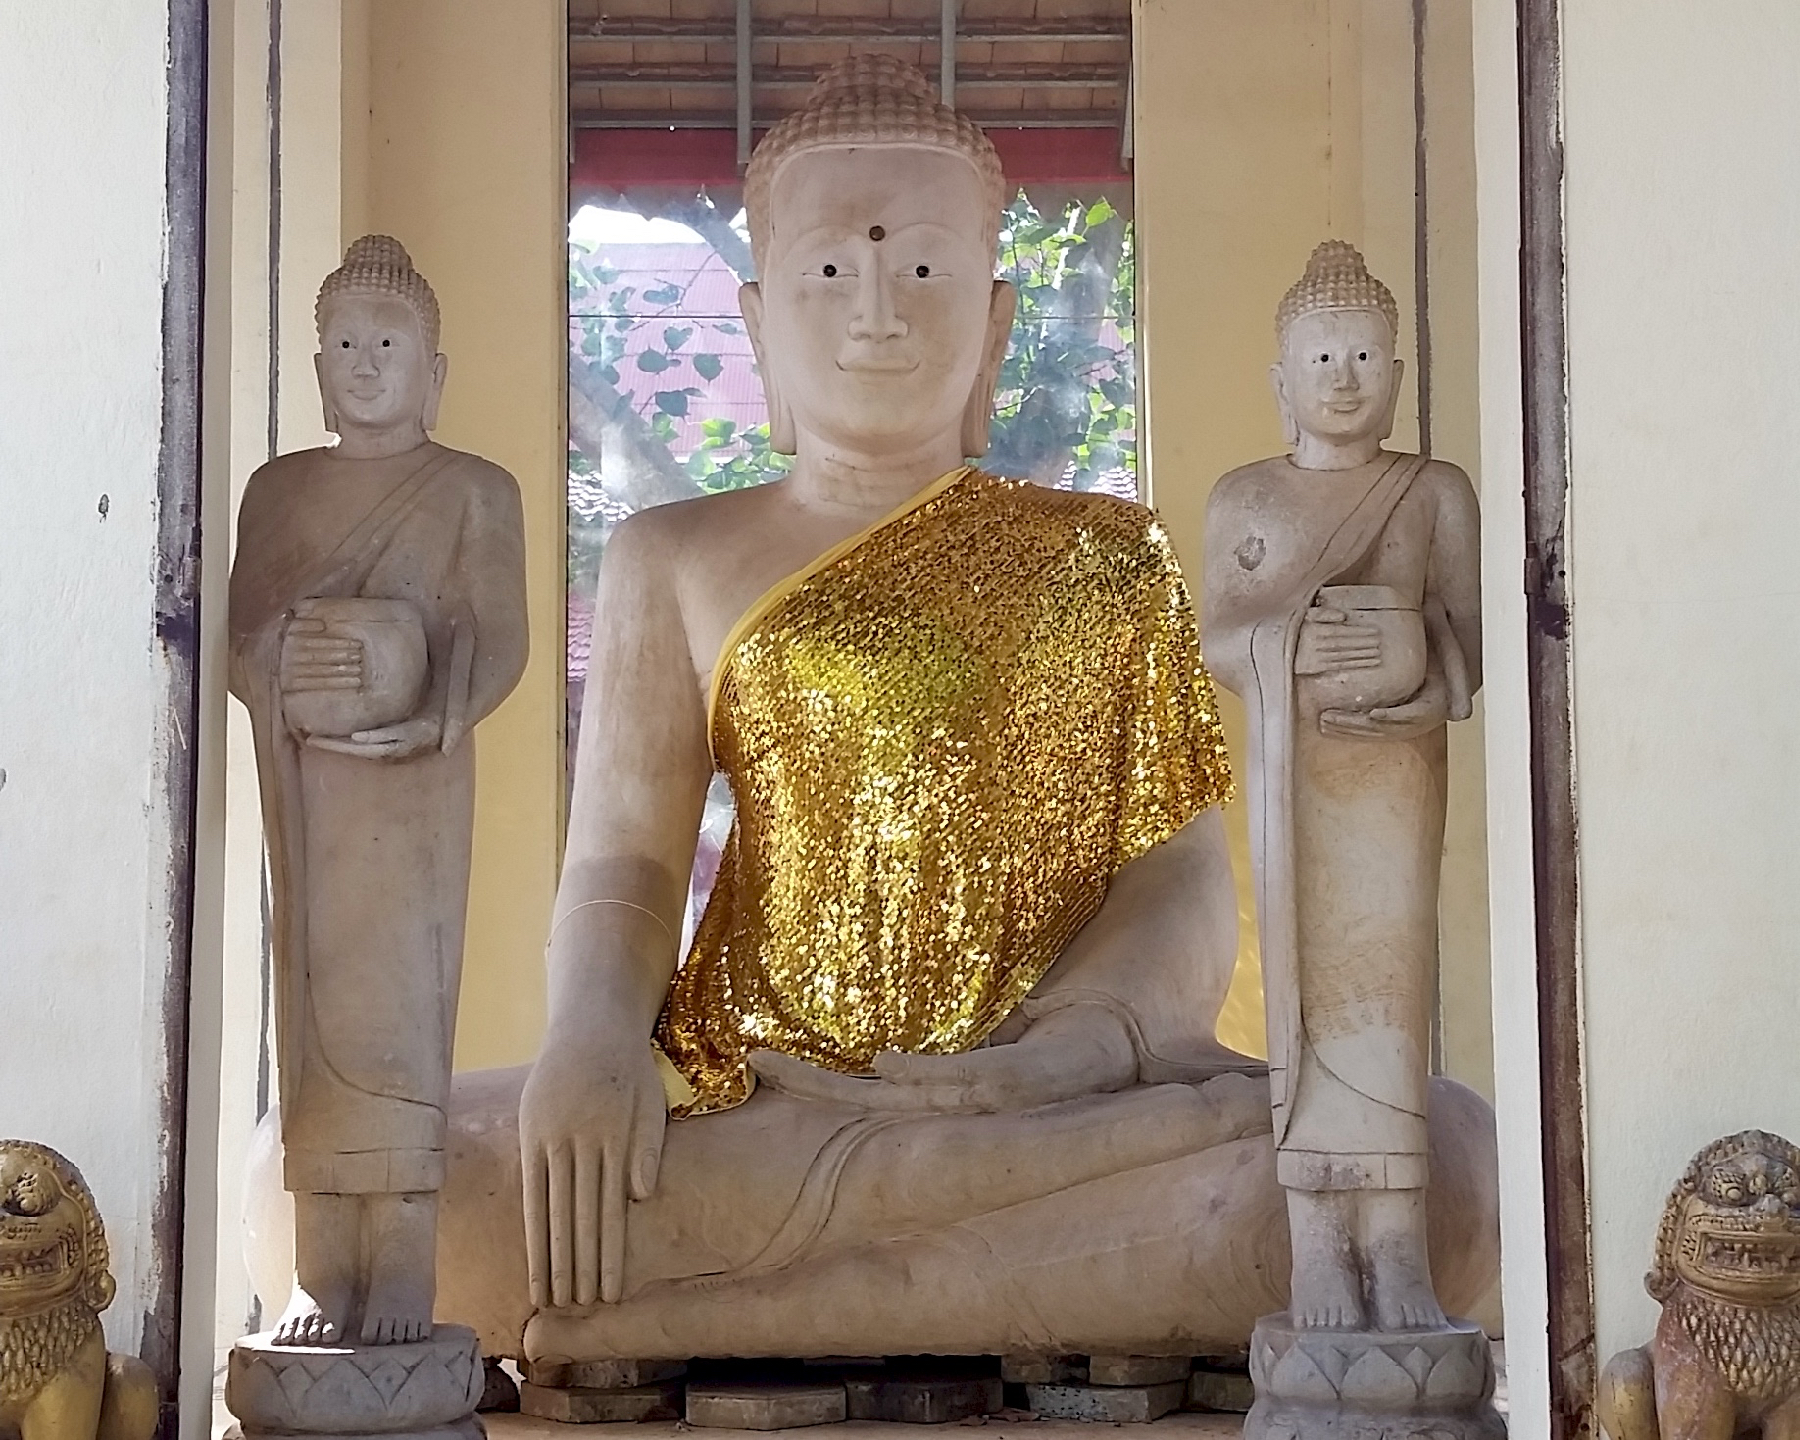 This Buddha is ready for a night on the town with the lads.